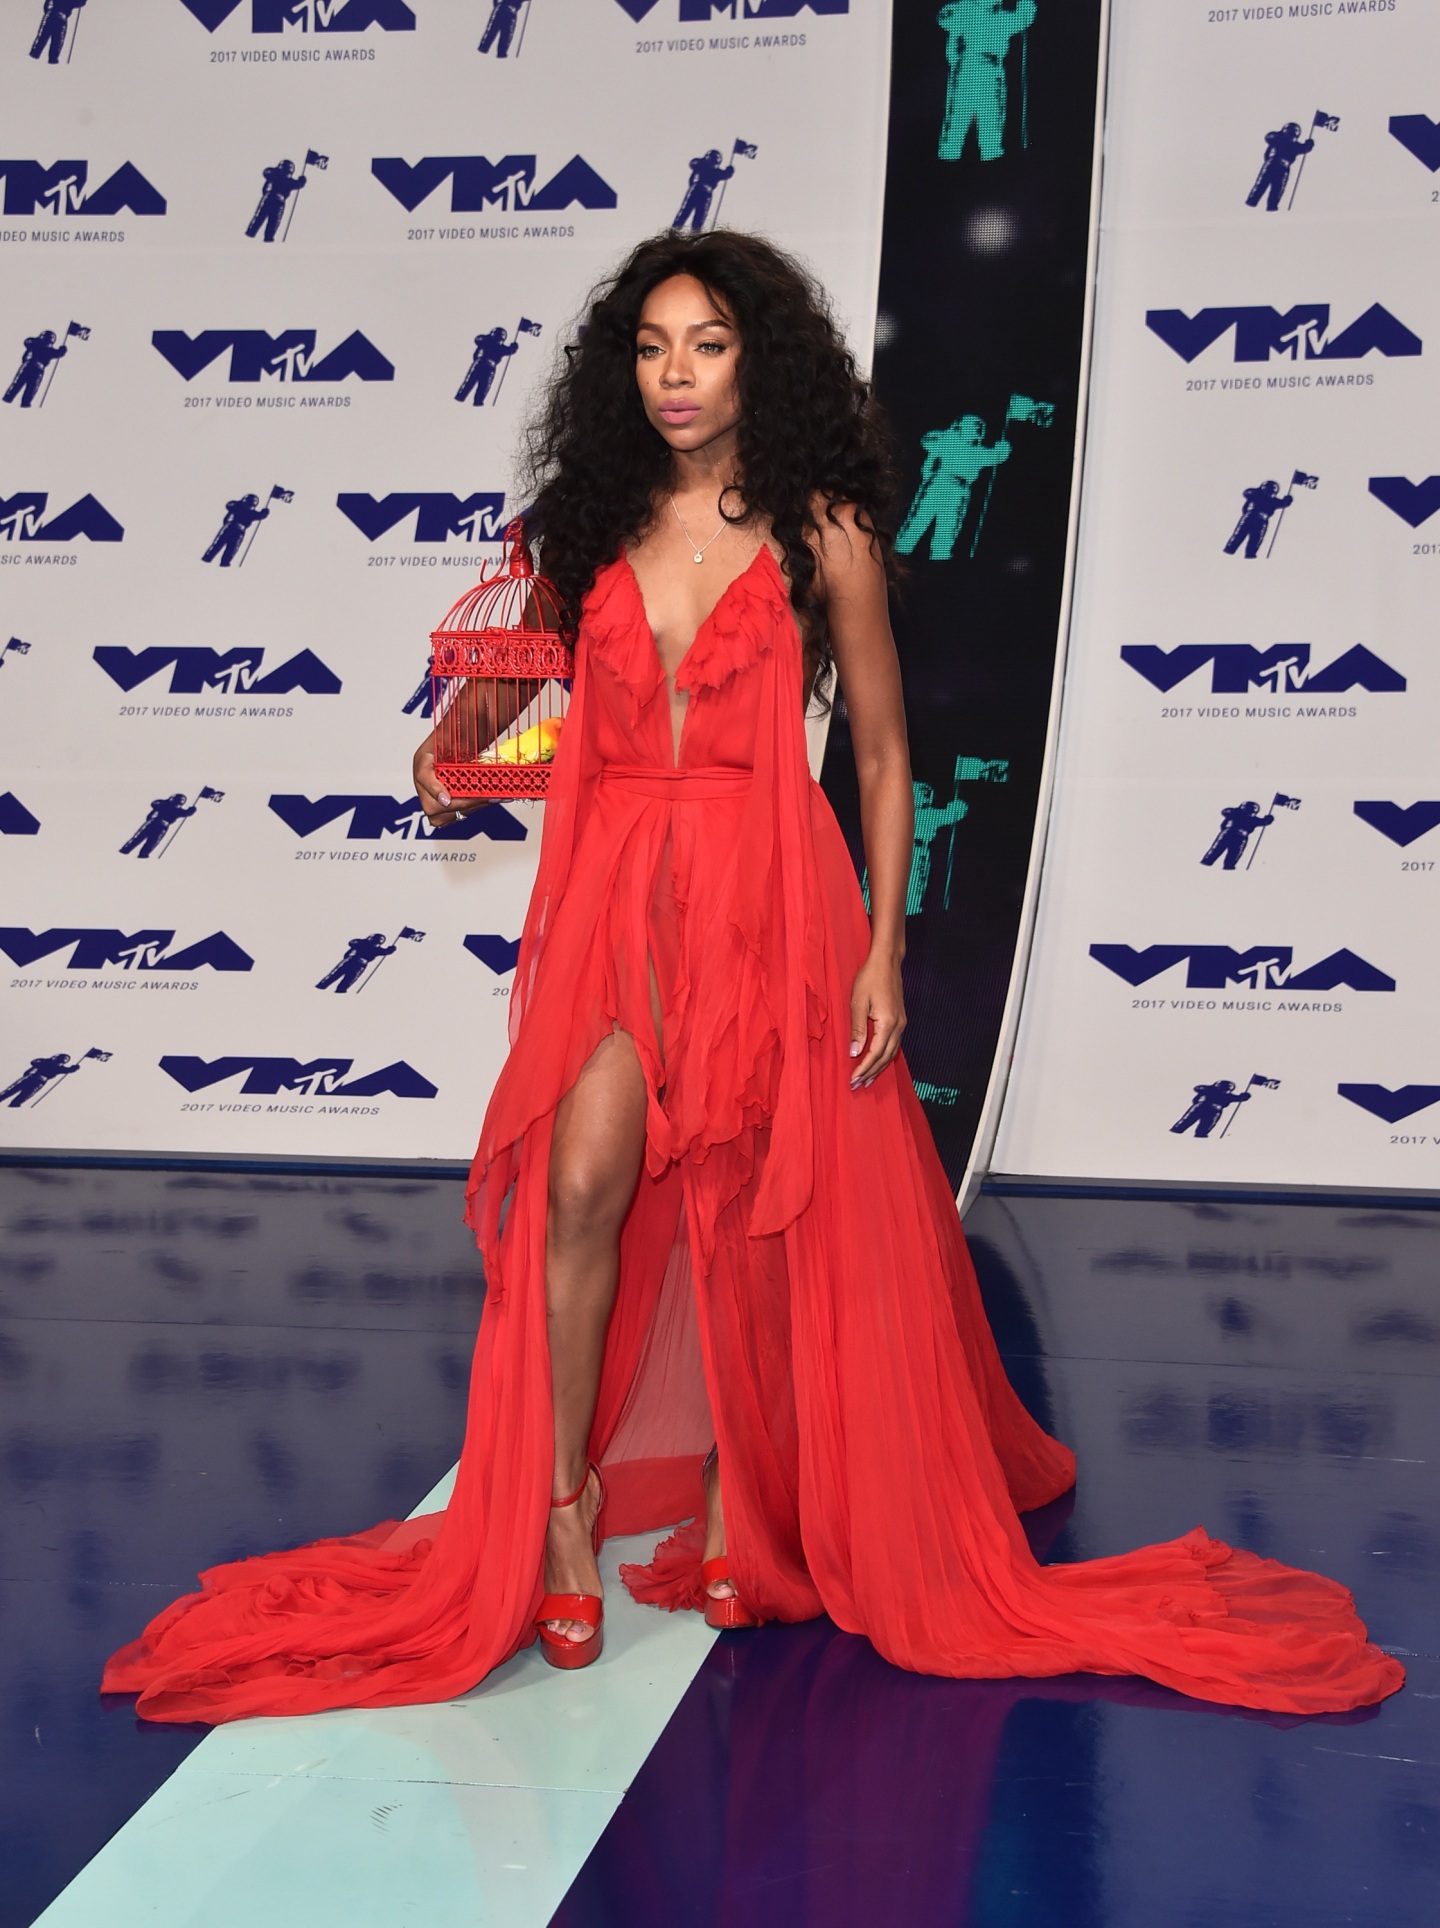 Here Are All The Looks You Need To See From The 2017 VMAs Red Carpet